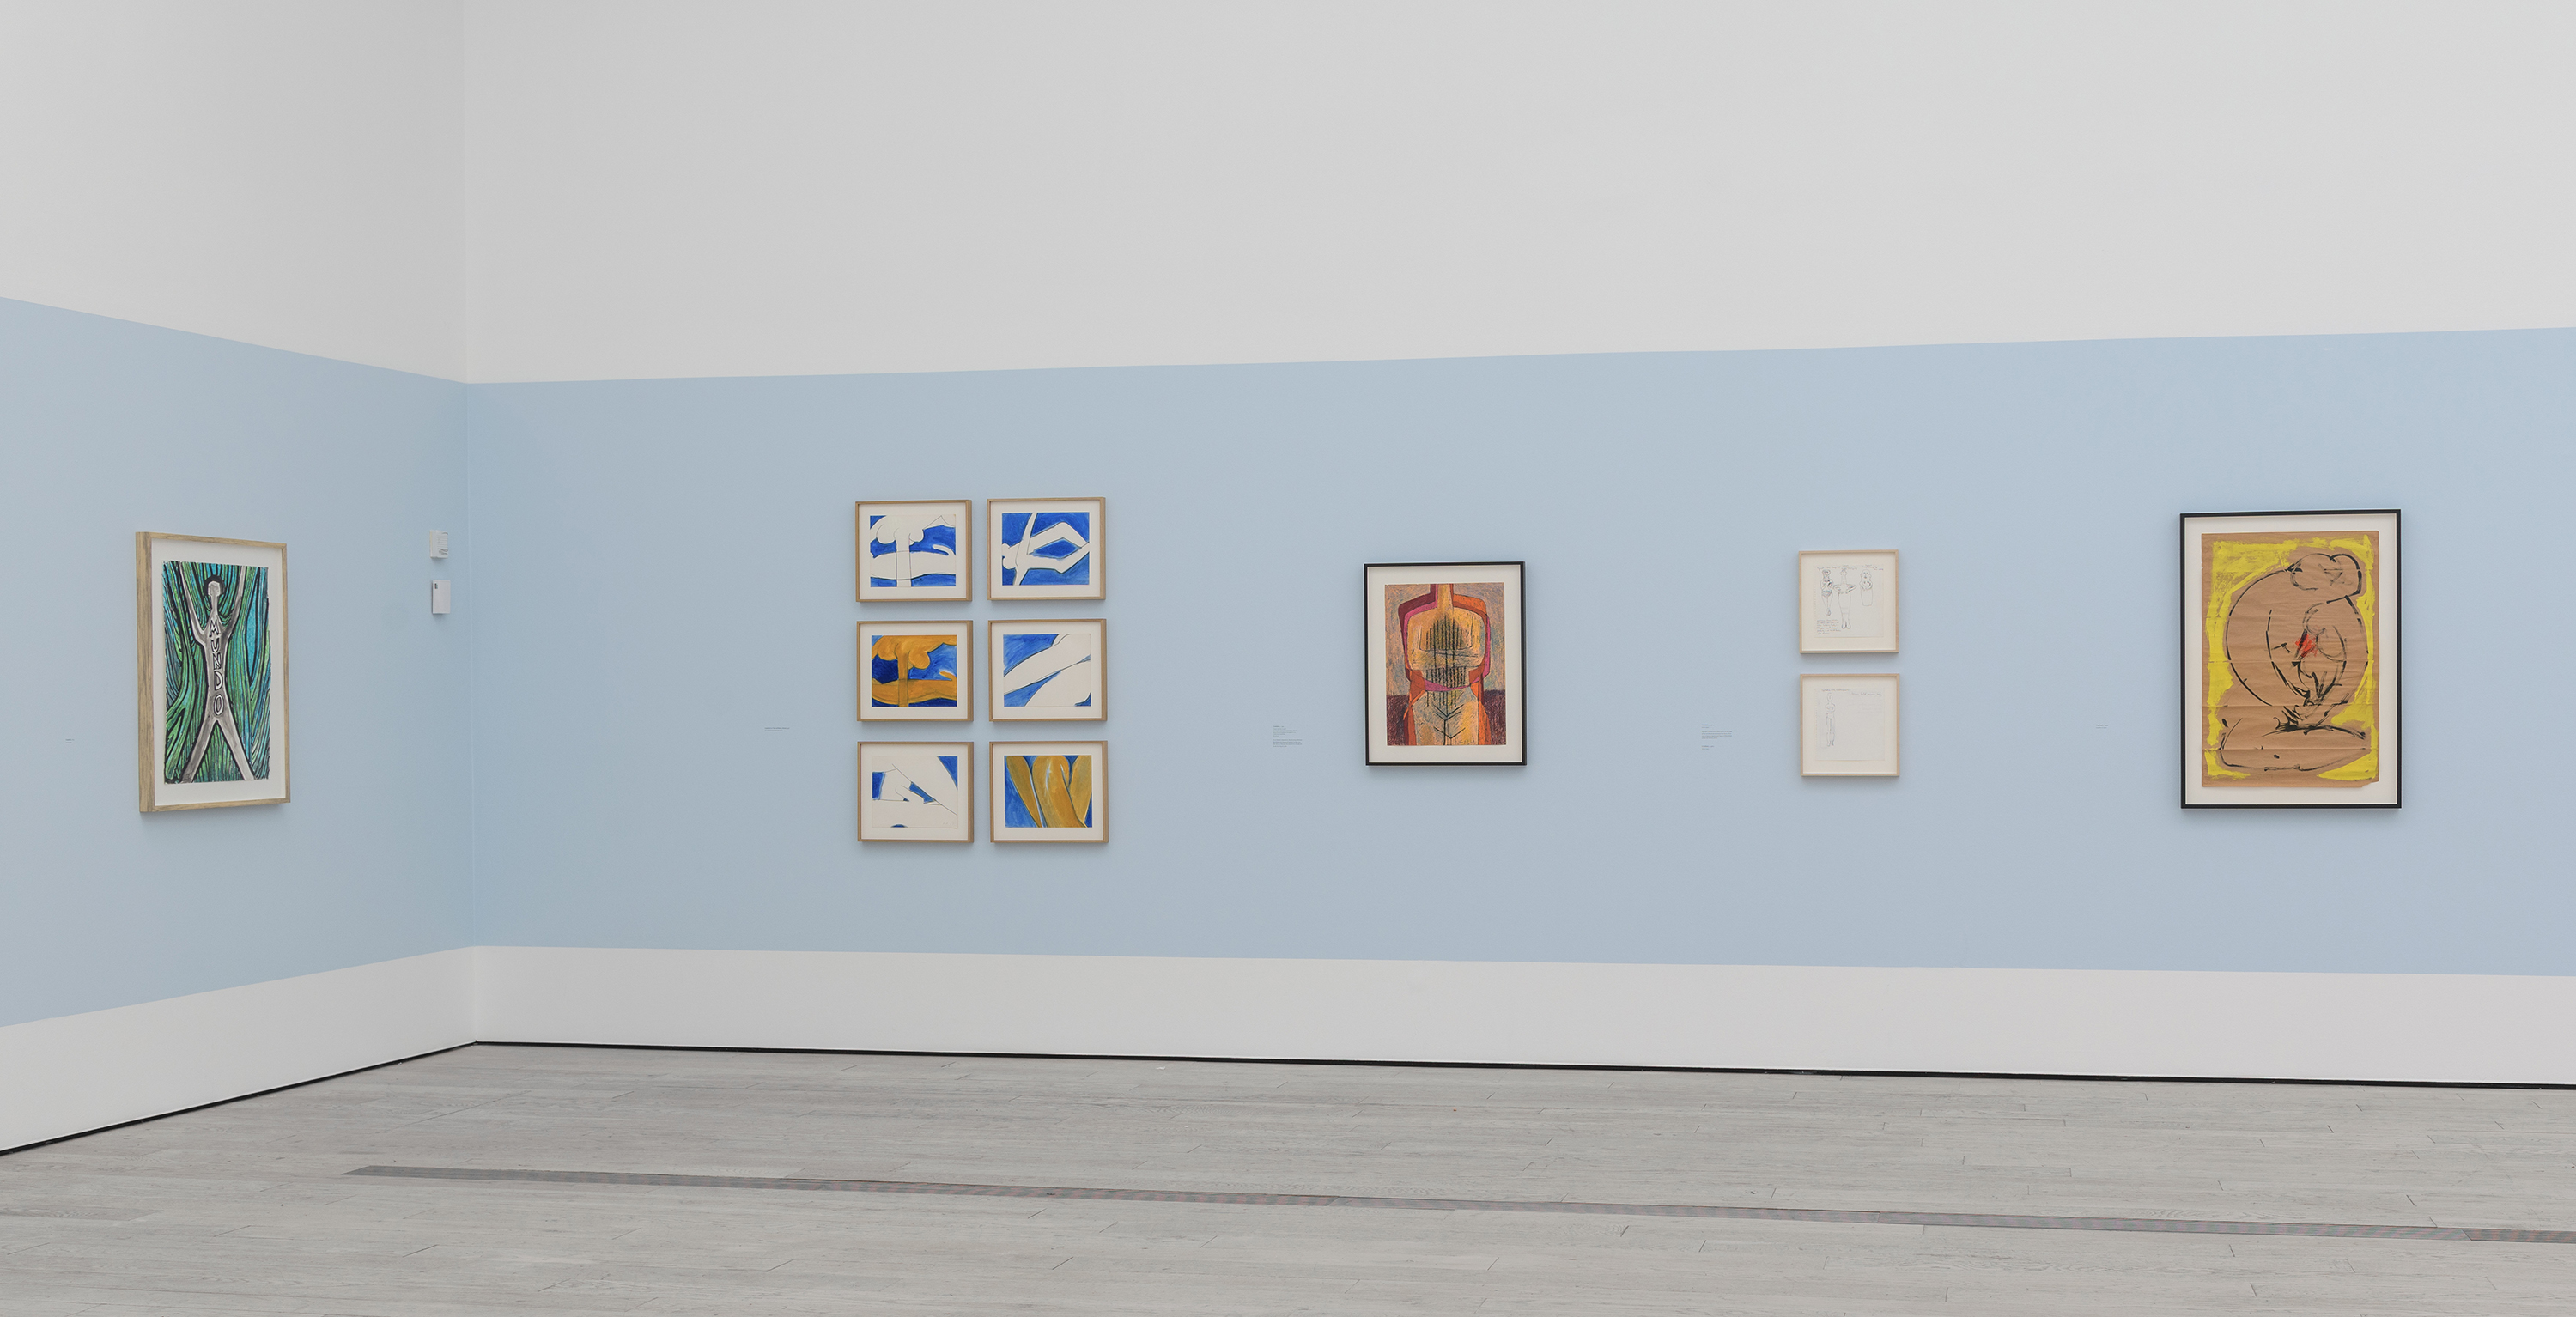 Installation photograph, Luchita Hurtado: I Live I Die I Will Be Reborn, Los Angeles County Museum of Art, 2020, art © Luchita Hurtado, photo © Museum Associates/LACMA. Works by Hurtado featuring figures and figure relationships, spanning a period of seven decades.